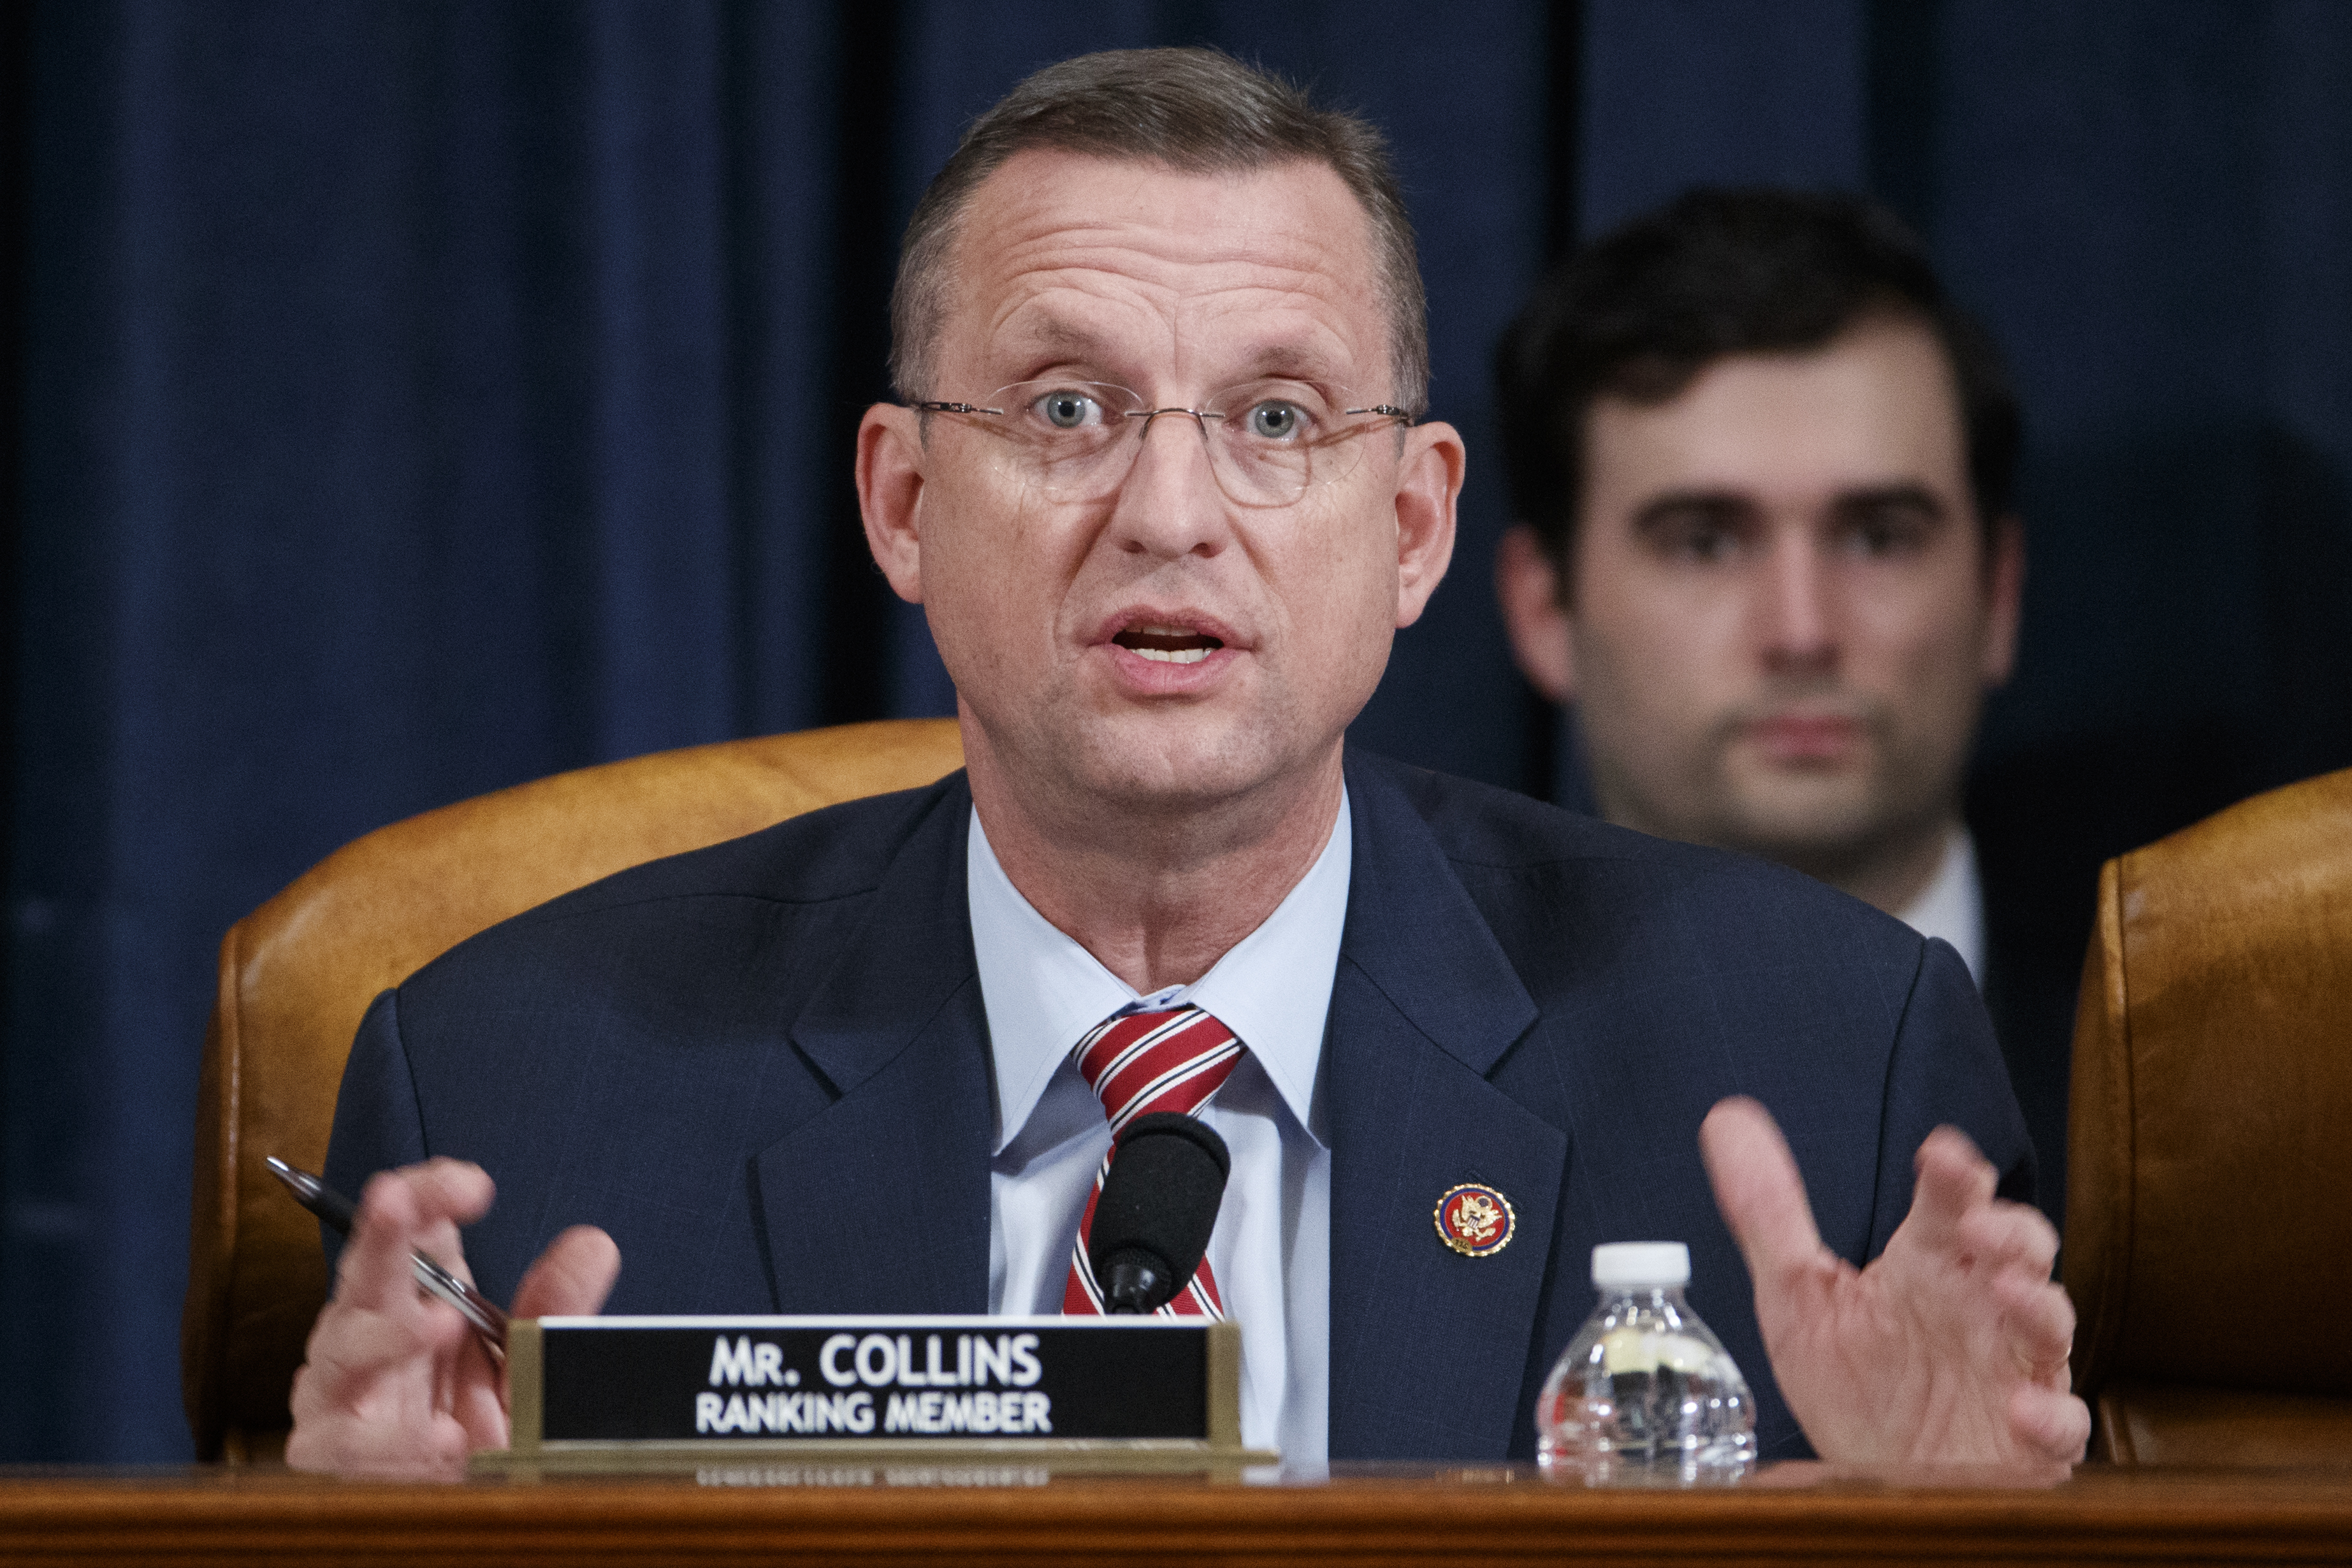 Ranking member Rep. Doug Collins, R-Ga. speaks during a House Judiciary Committee markup of the articles of impeachment against President Donald Trump on Capitol Hill in Washington, on Wednesday.